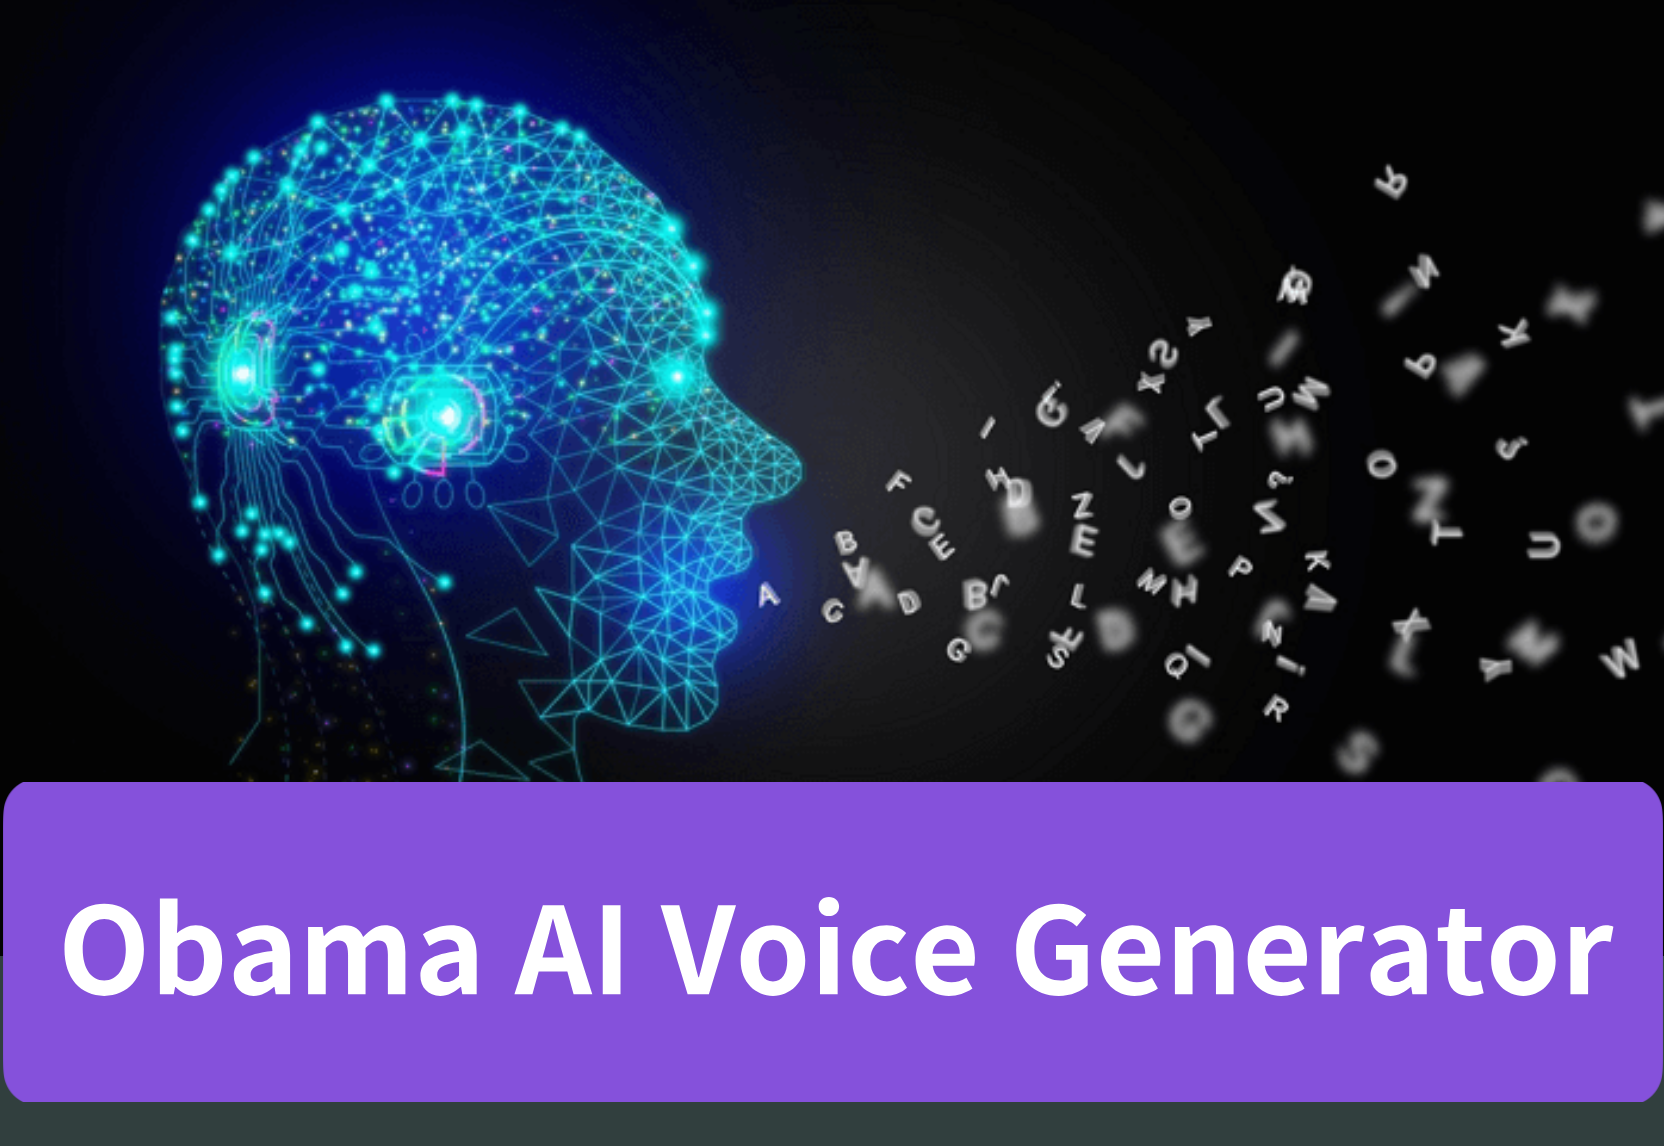 Presidential Speeches Made Easy: Obama Voice Generator Guide